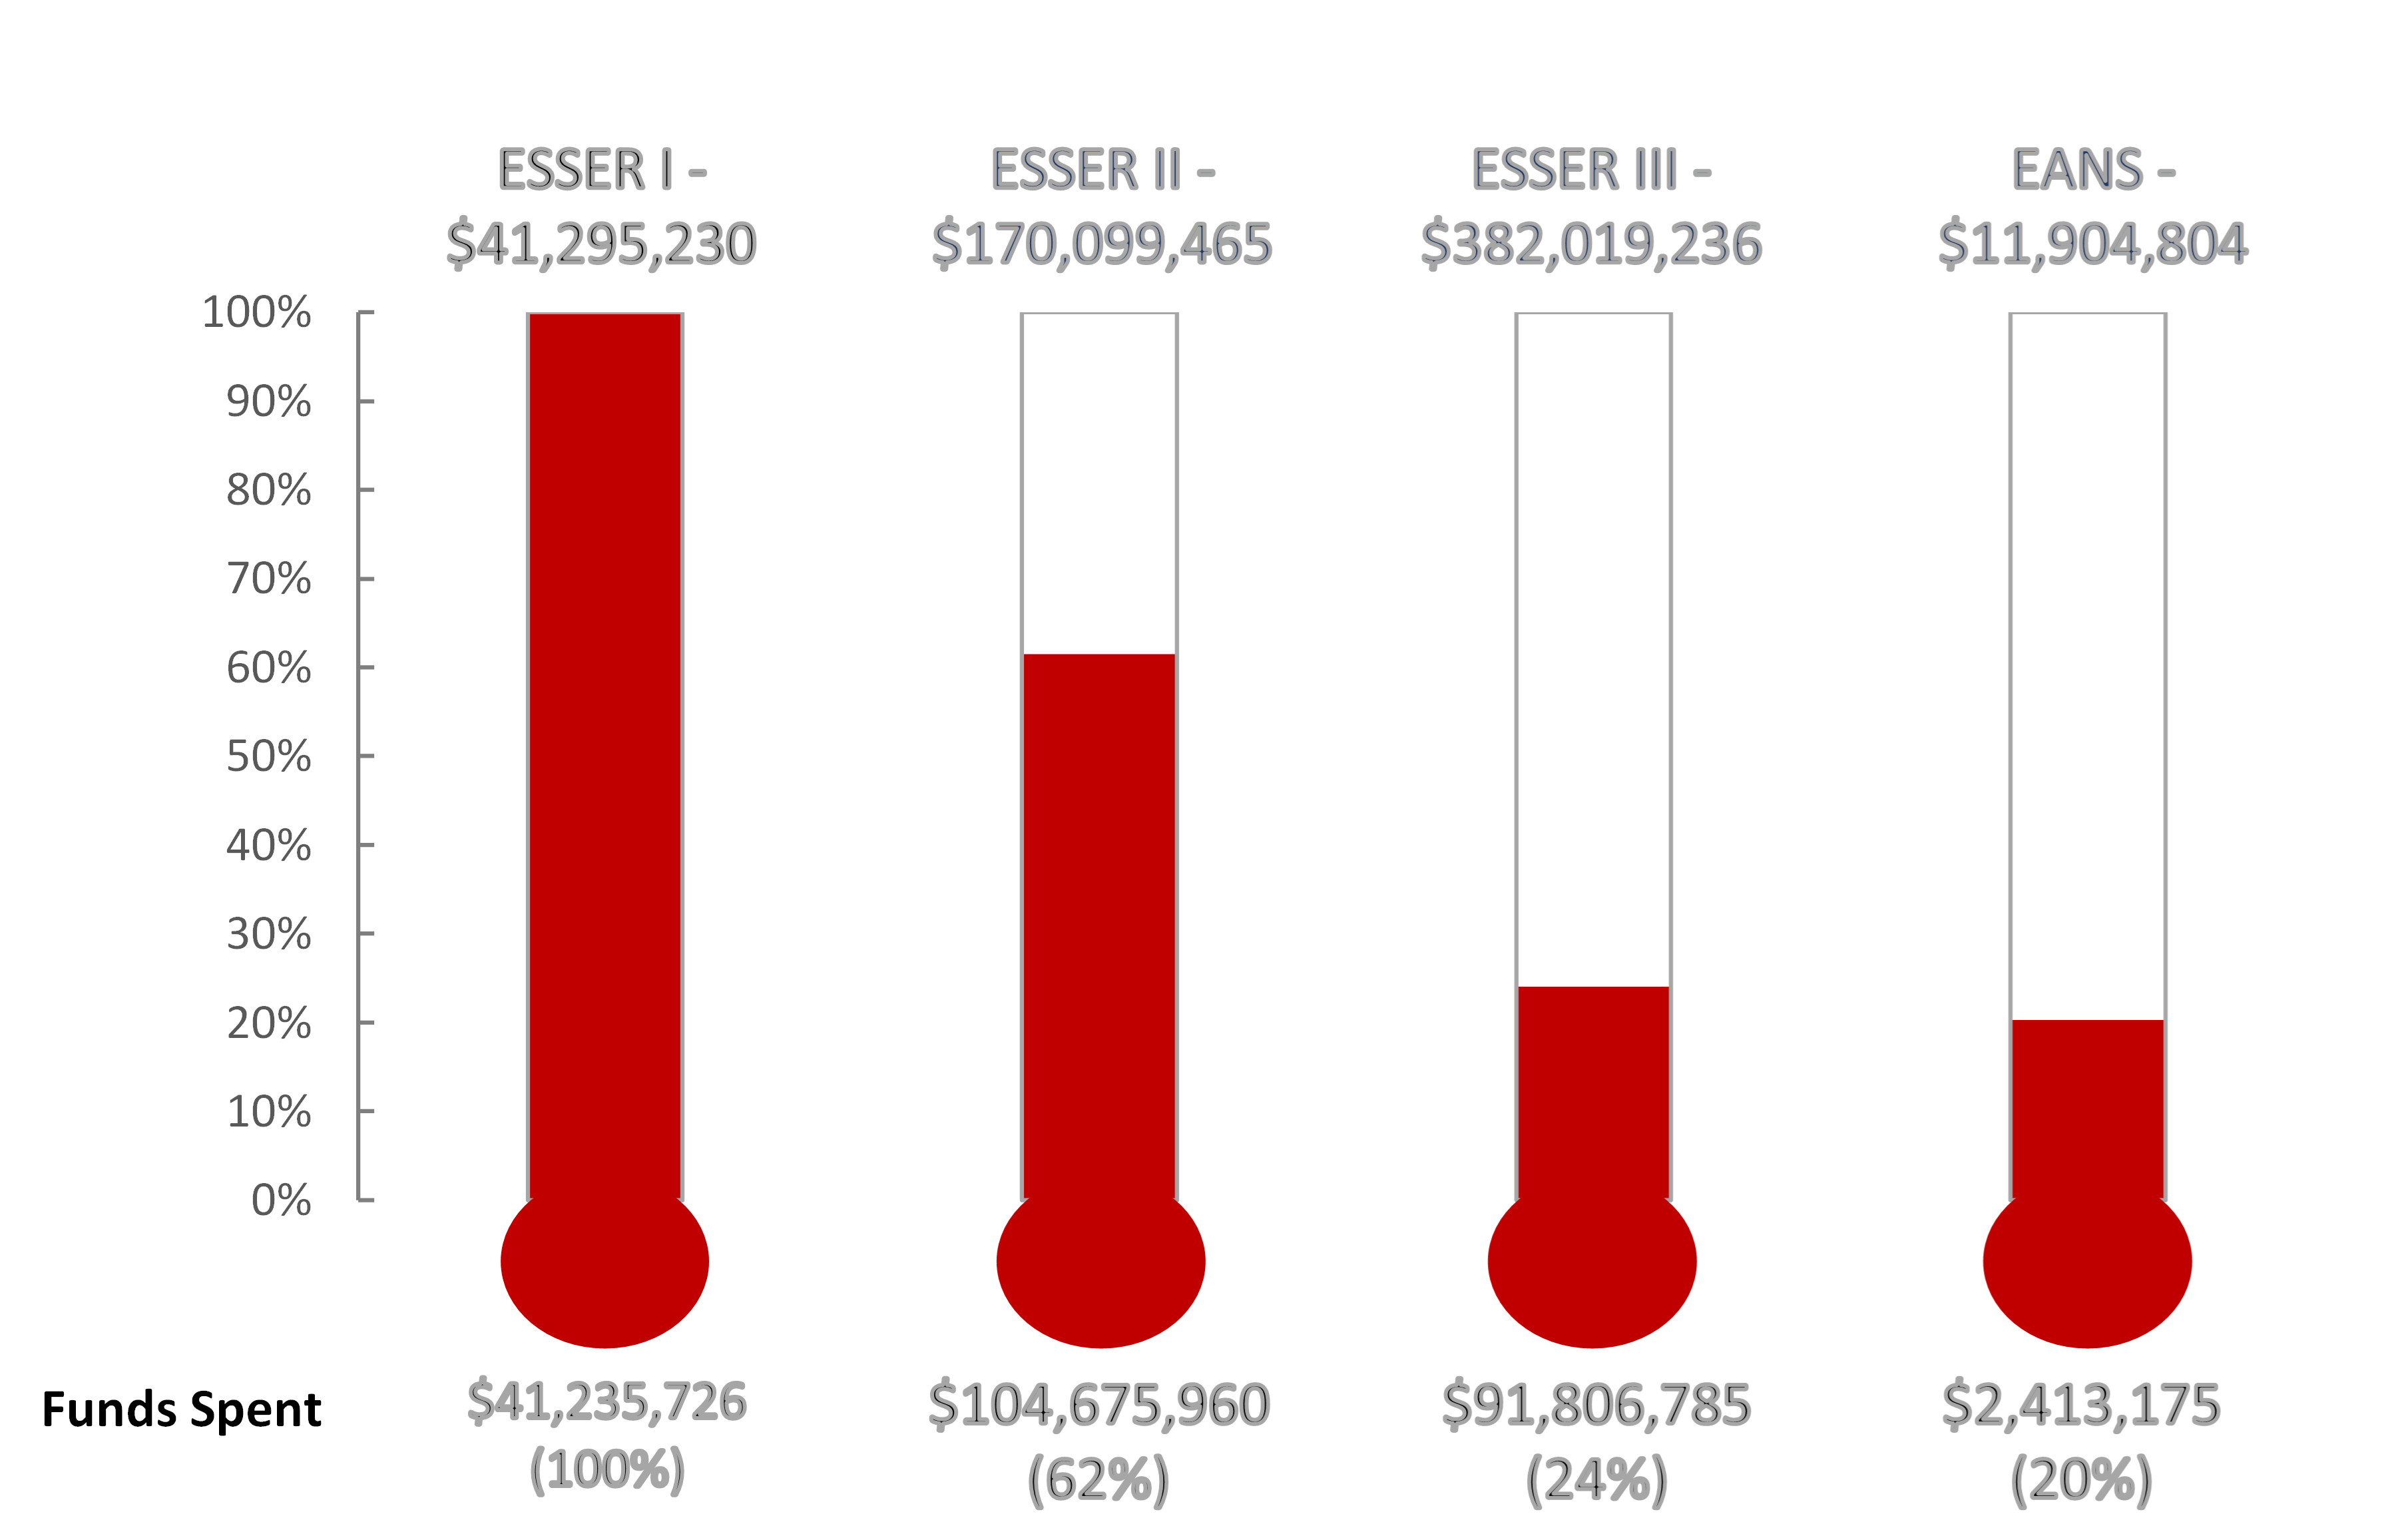 COVID-Related Funding Spent Graphic: ESSER I (Total= $41,295,230; $34,025,059 Spent; 82% Spent); ESSER II (Total= $170,099,465; $62,282,375  Spent; 37% Spent); ESSER III (Total= $382,019,236; $35,172,703 Spent; 9% Spent); EANS (Total=$11,904,804; $1,143,305  Spent, 10% Spent)